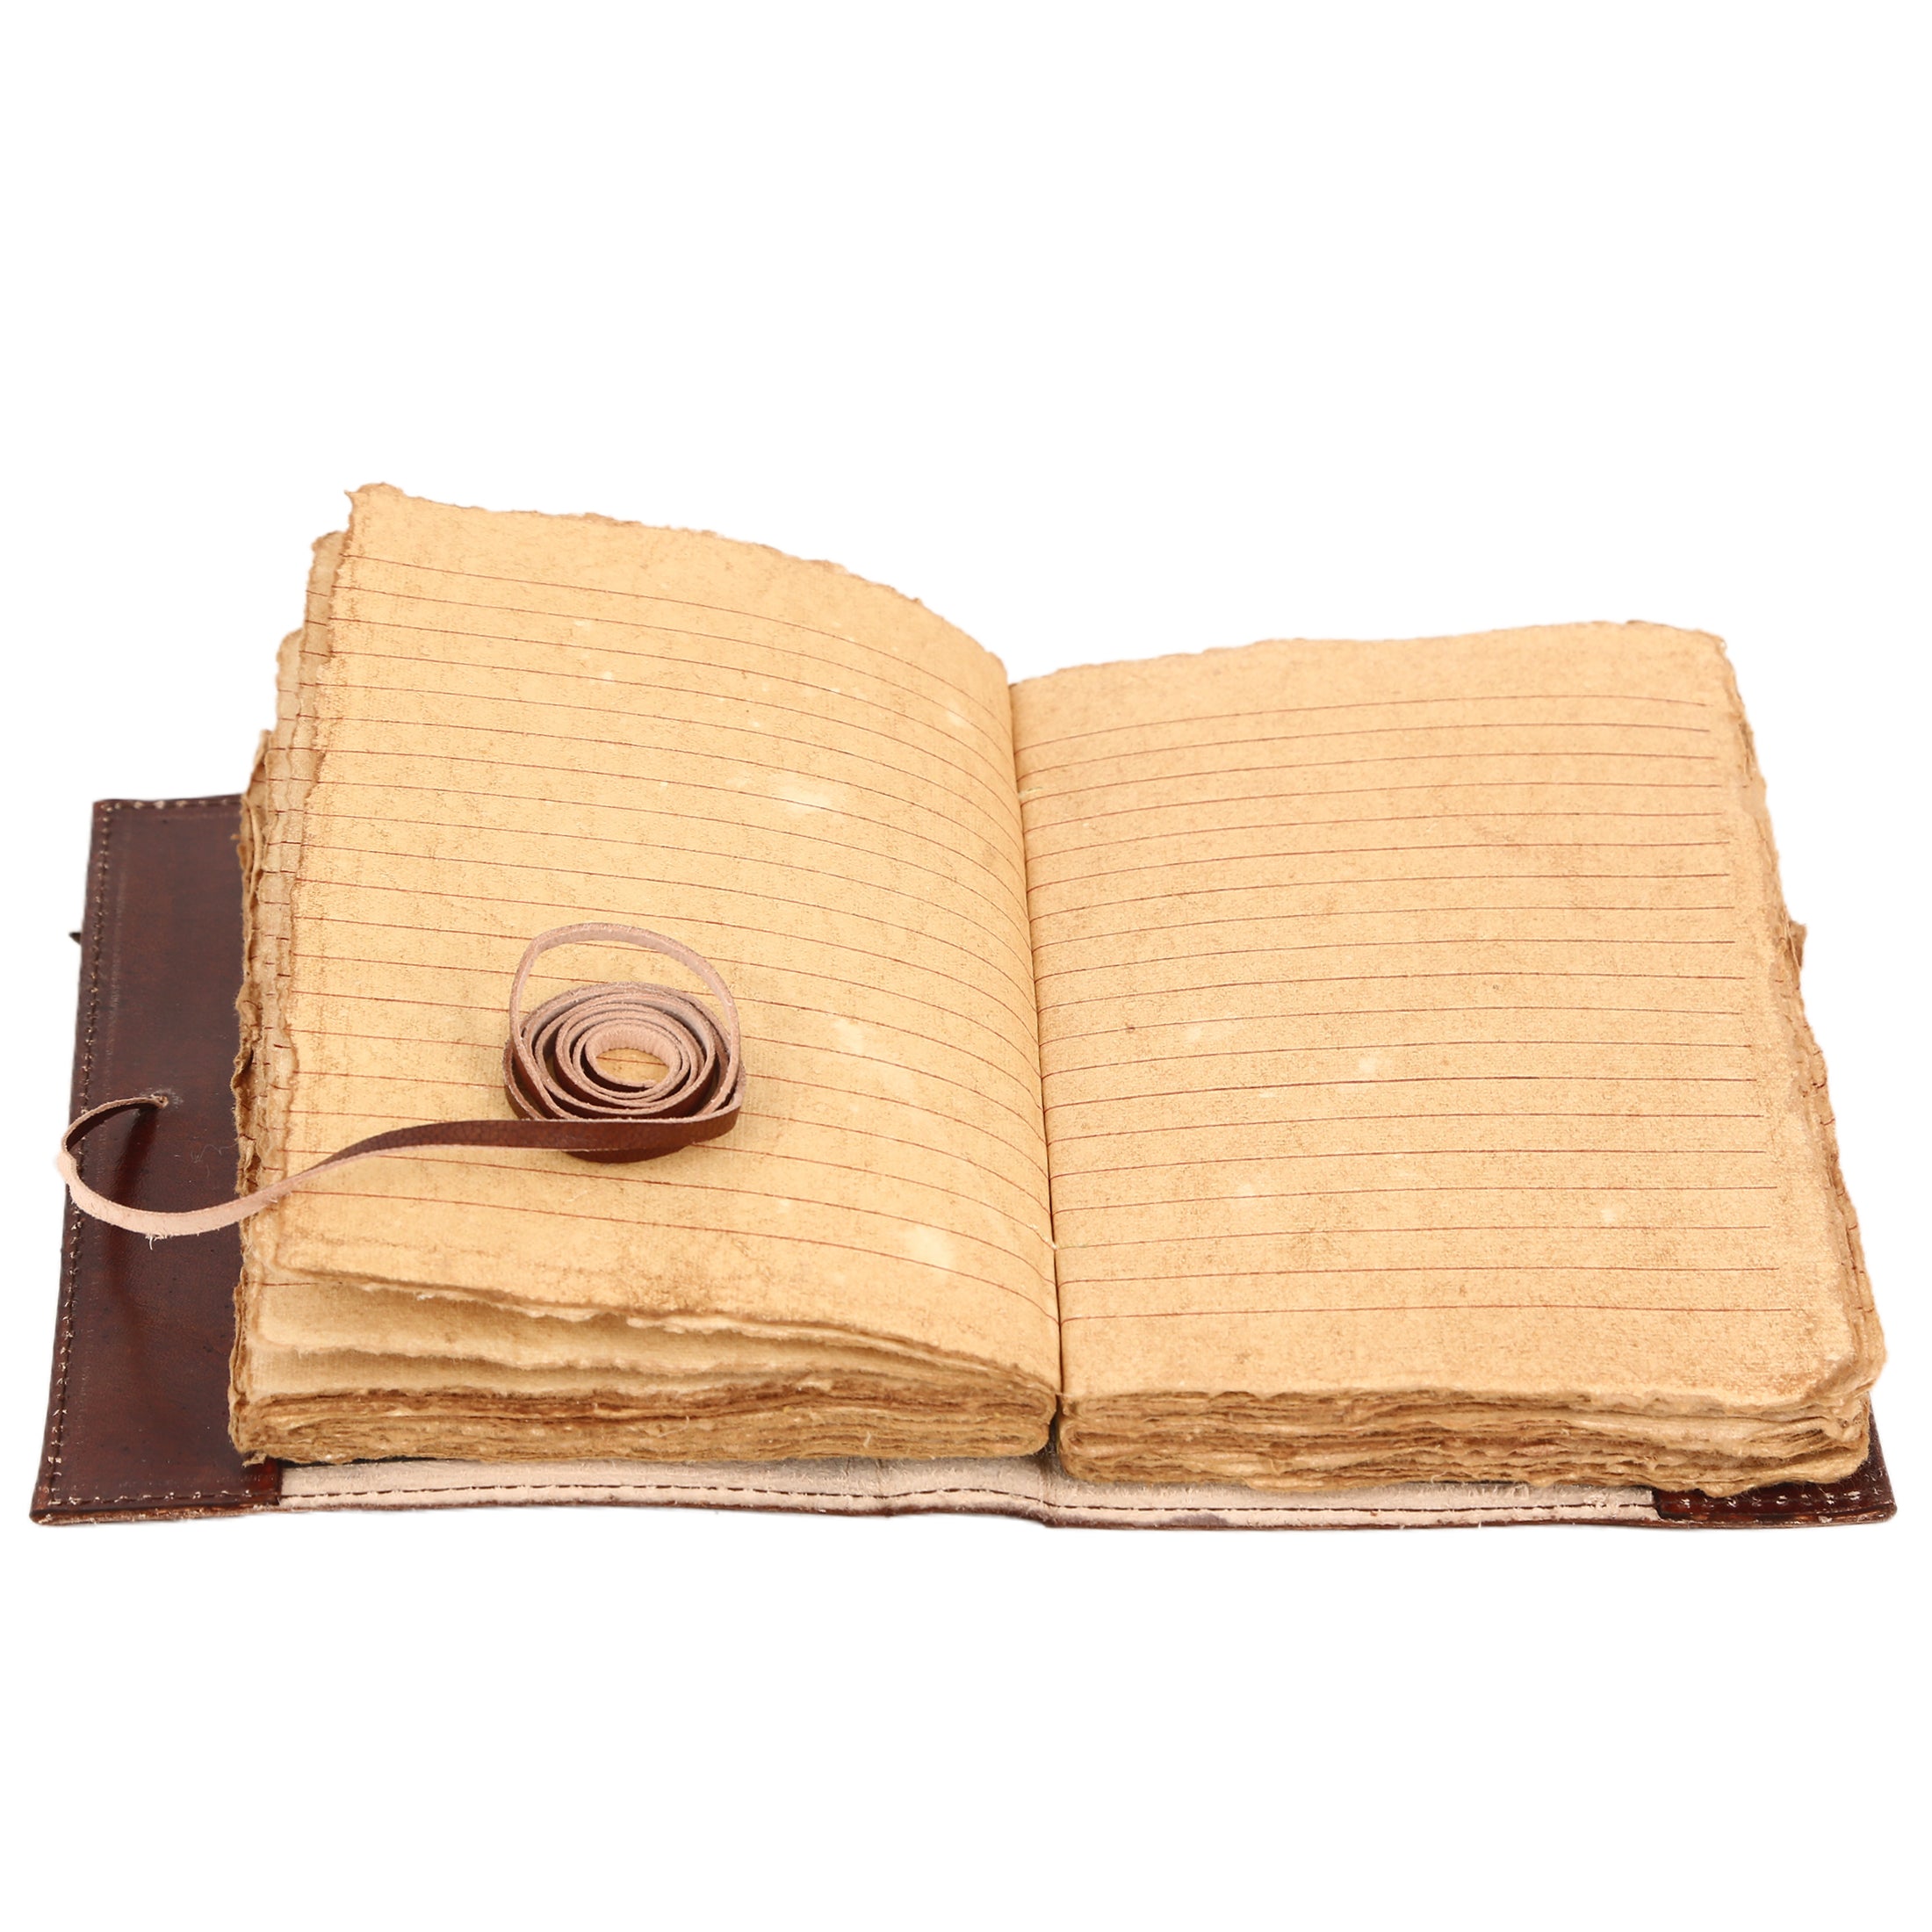  Leather Journal Notebook, Journal for Women and Men